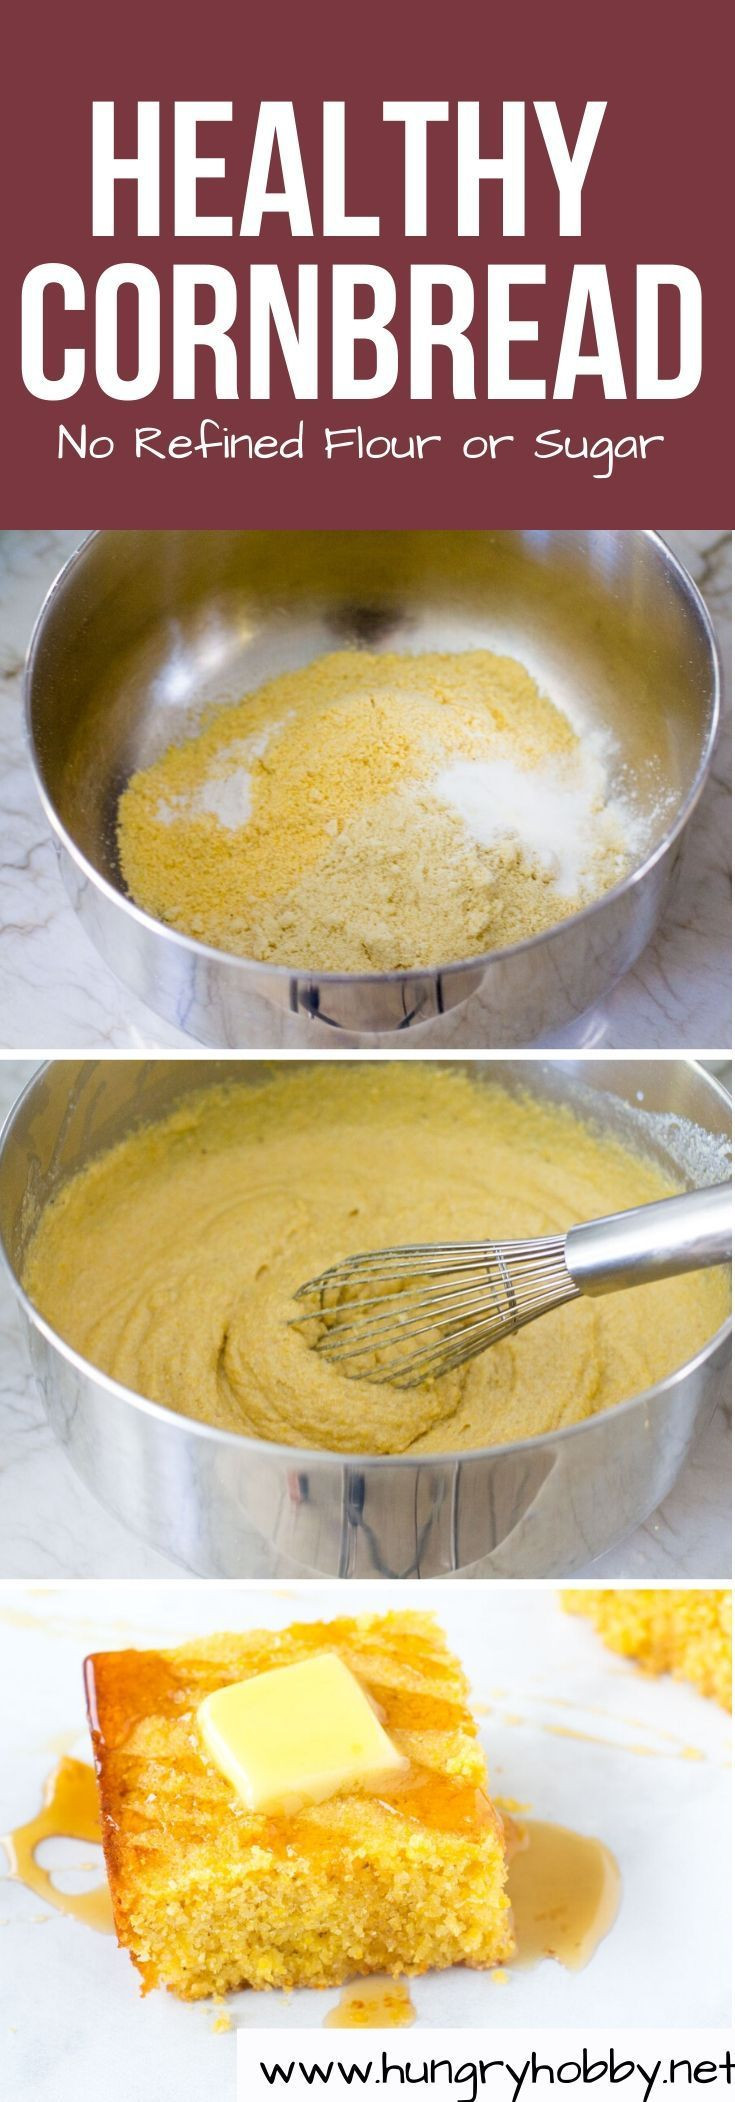 Healthy Cornbread Recipe
 Healthy Cornbread Recipe With images